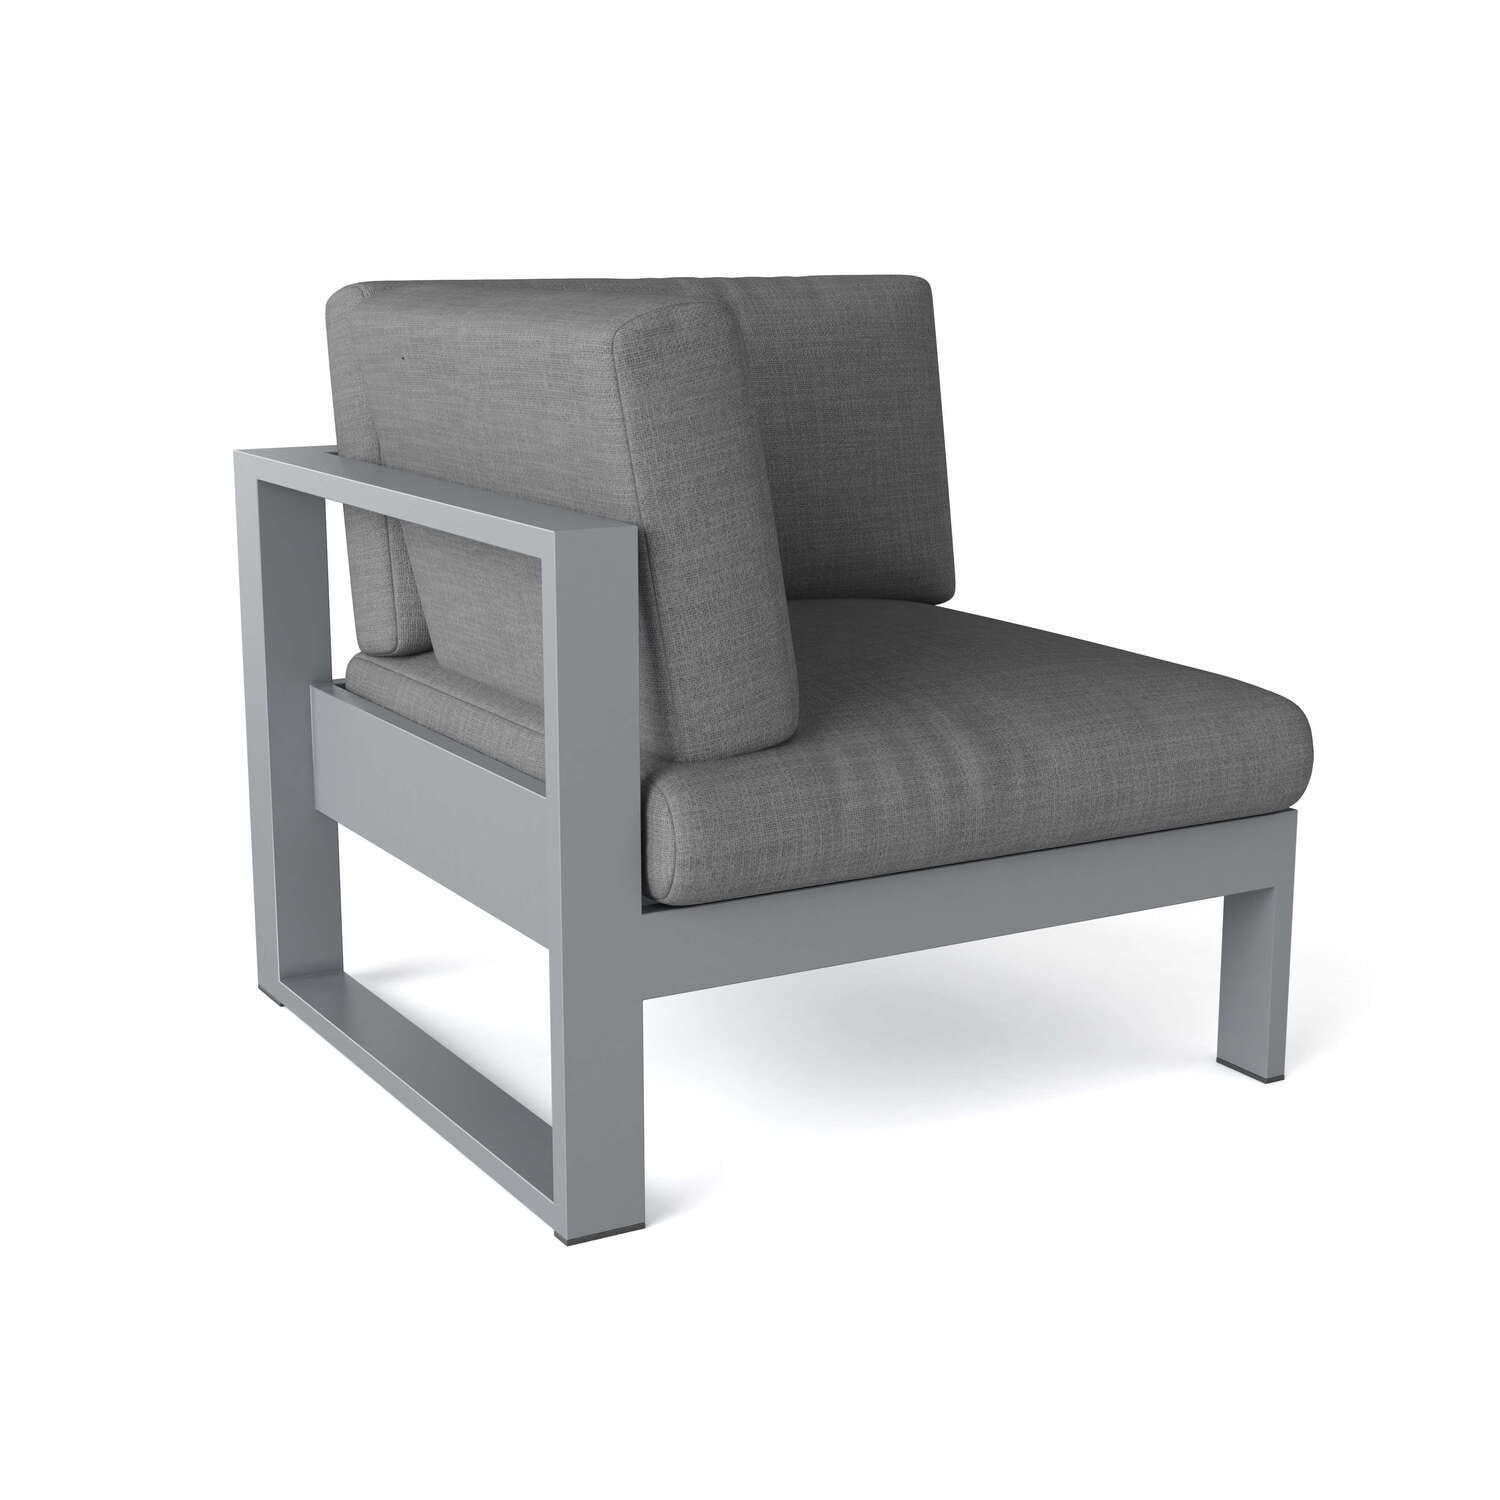 Ds-1003 Lucca Corner Deep Seating Chair